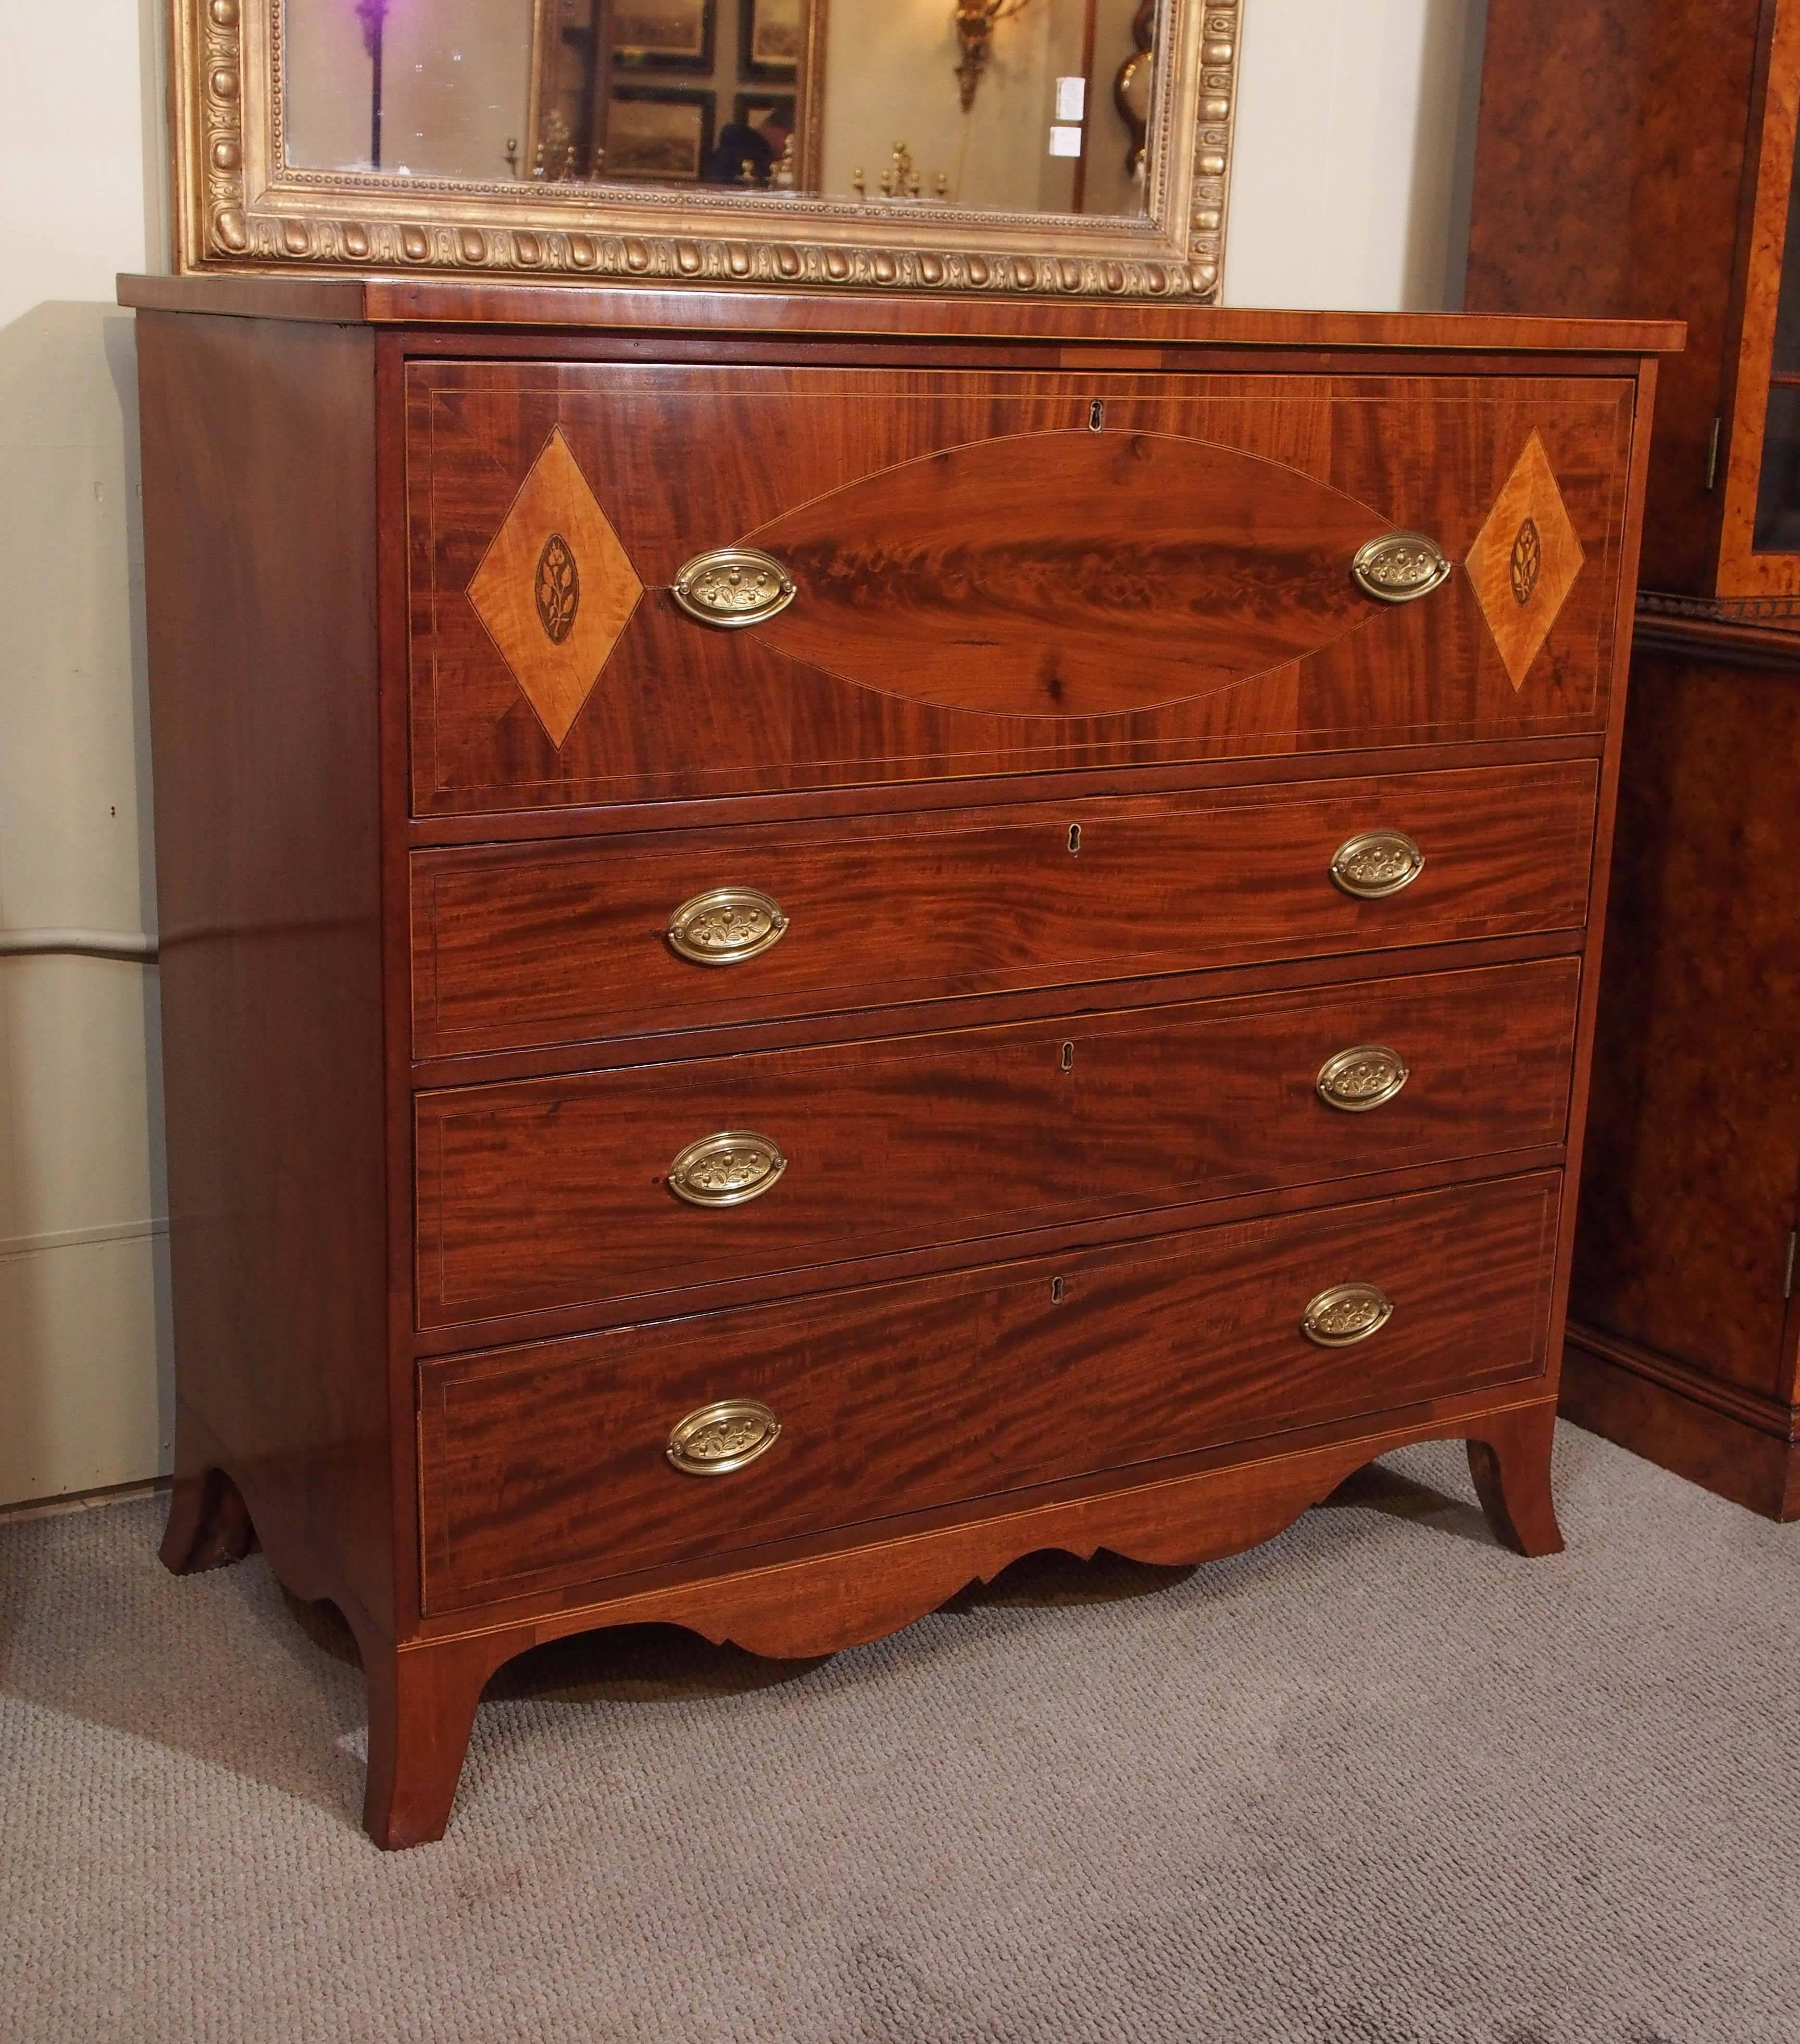 Antique American inlaid chest of drawers.